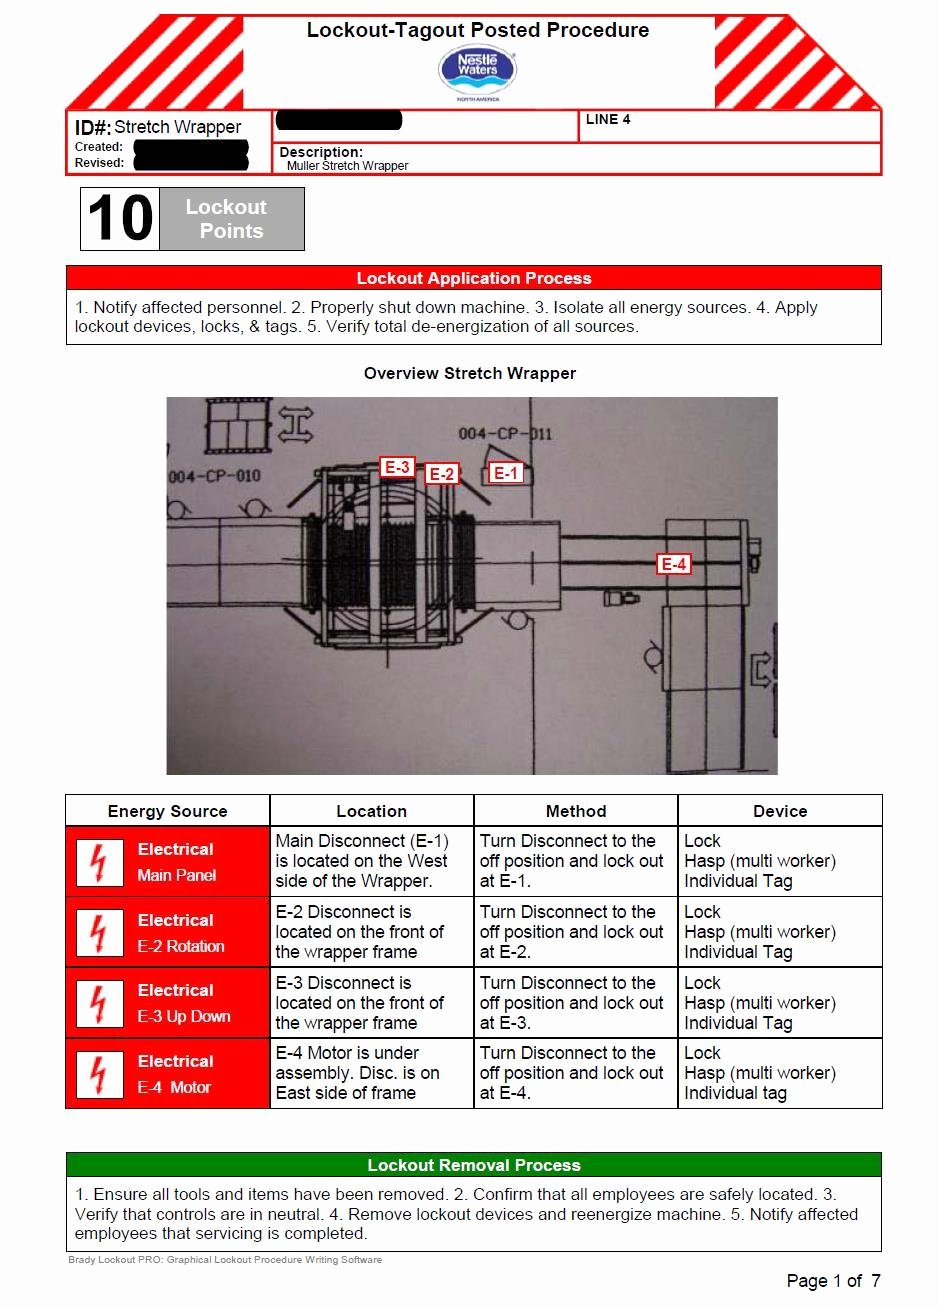 Fmcsa Safety Management Plan Template Beautiful Lock Out Tag Out Energy Control Program